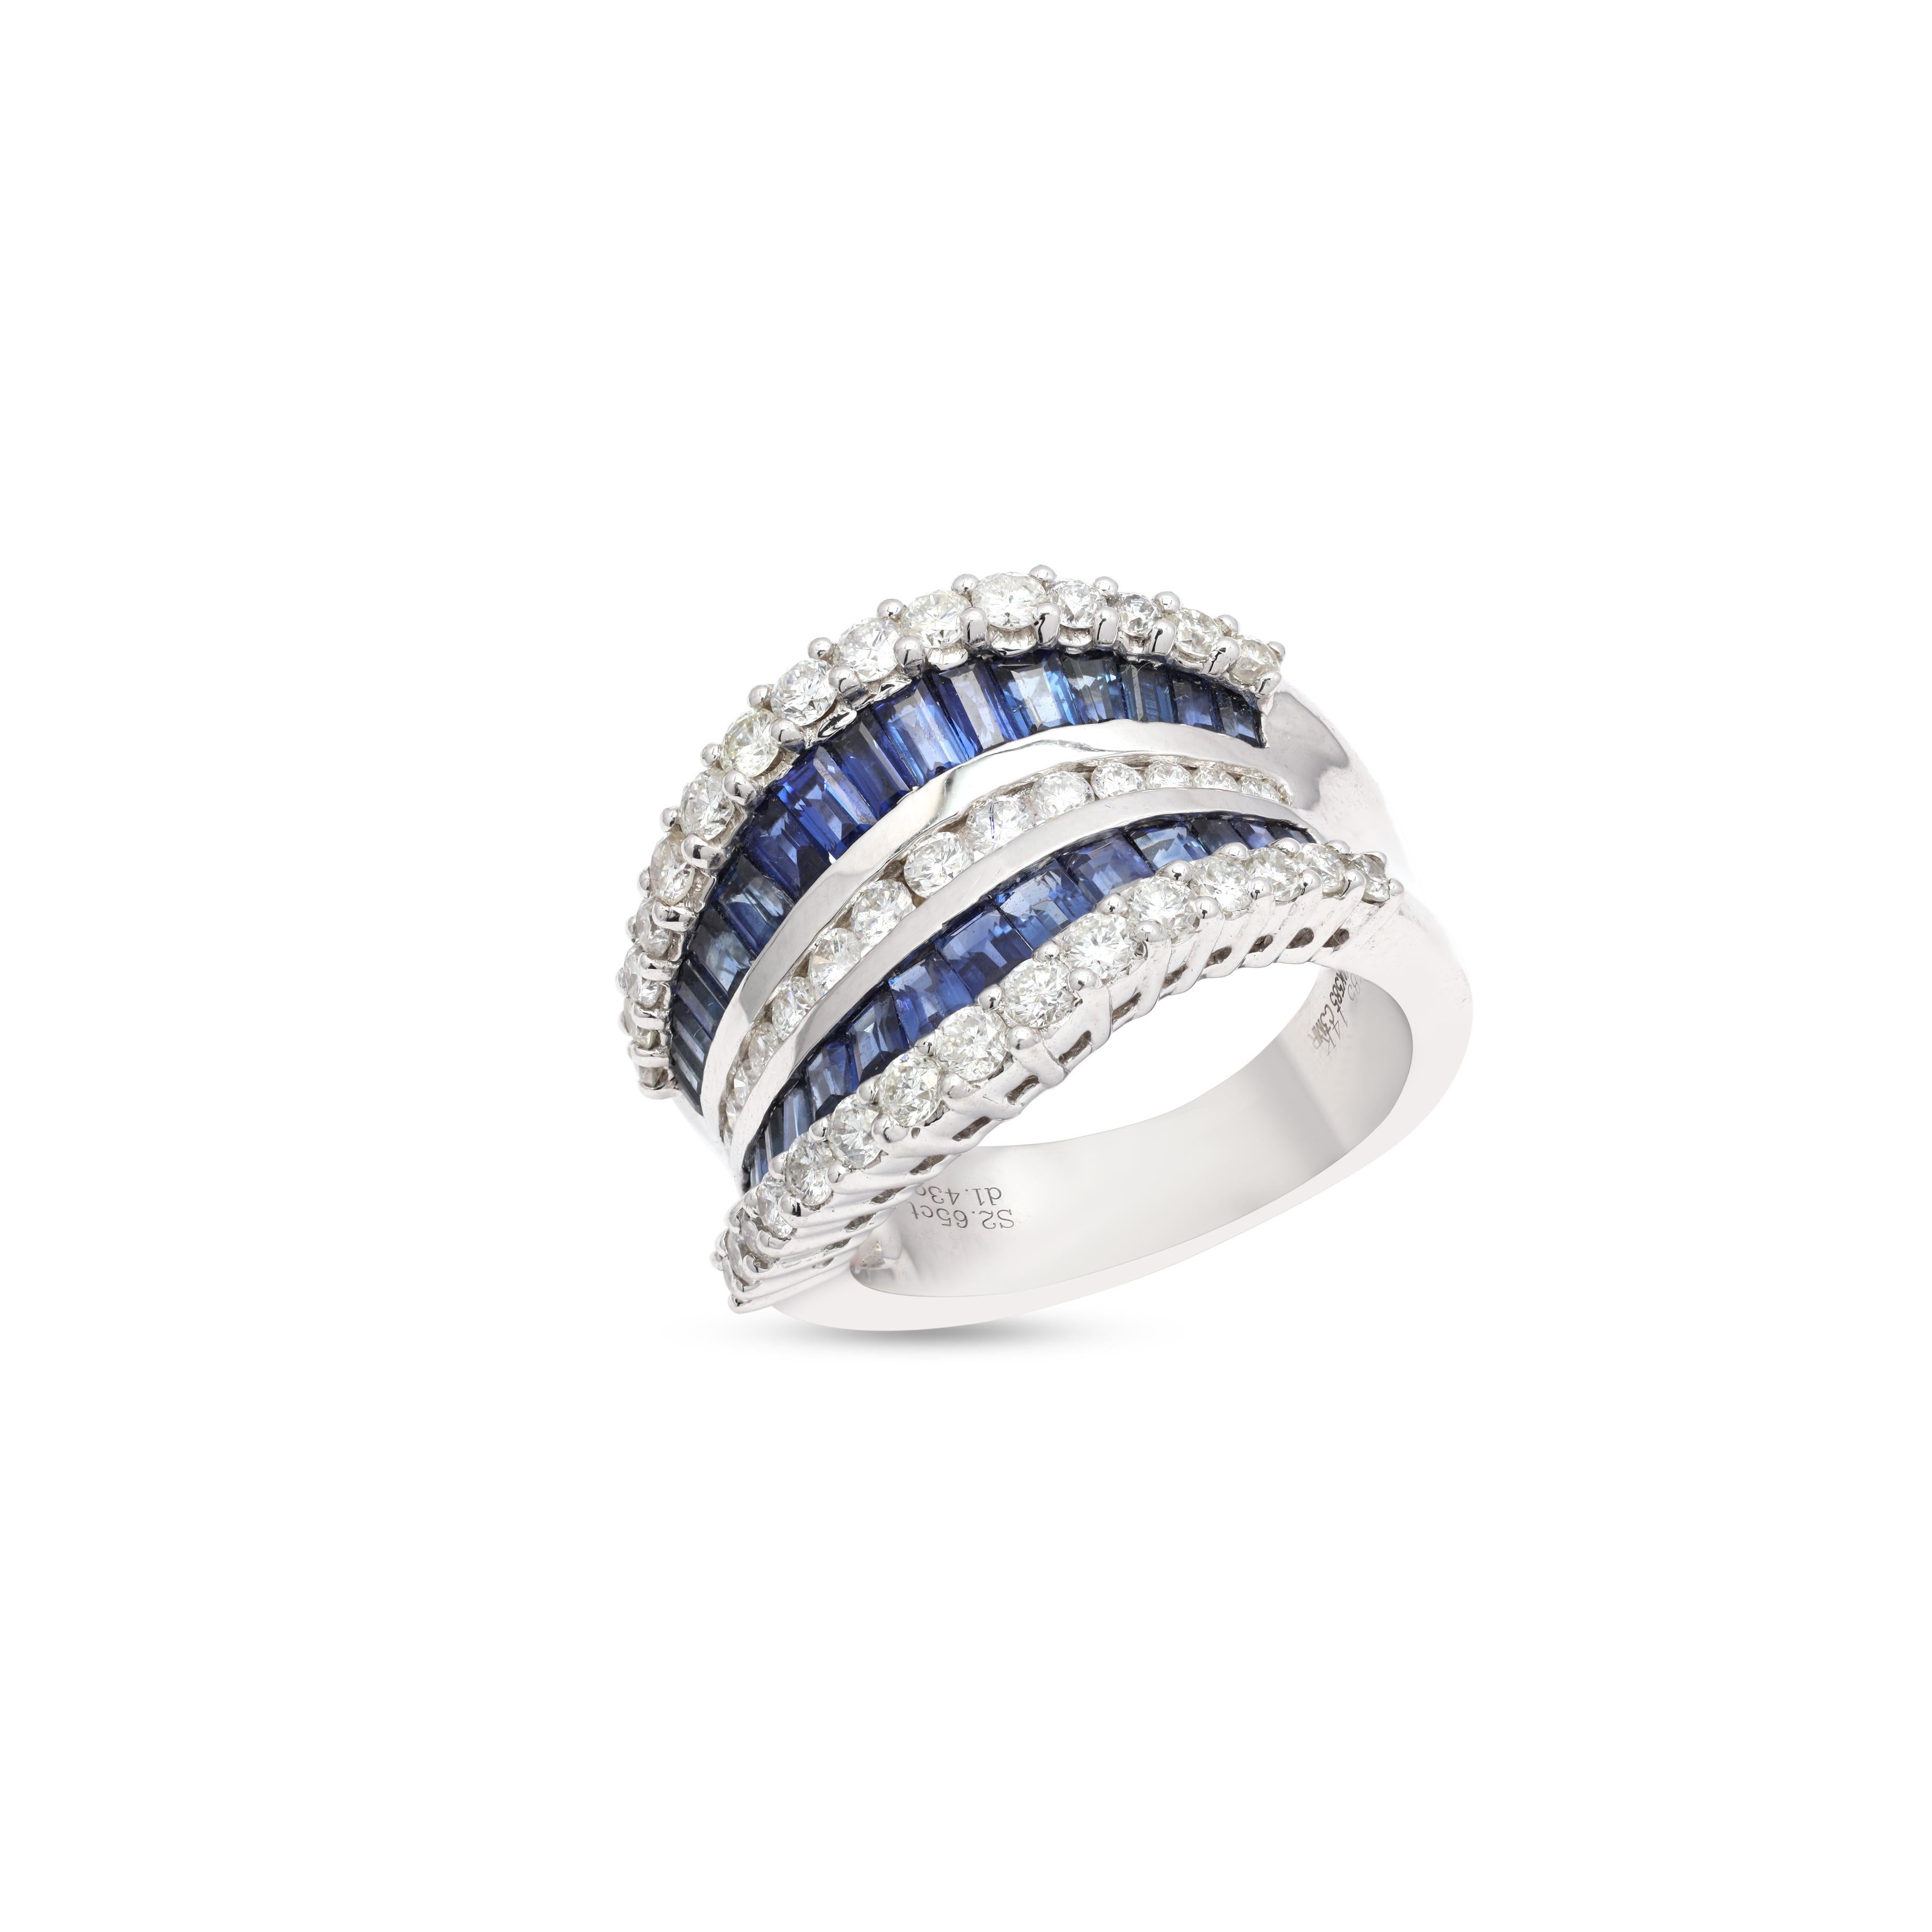 For Sale:  2.65 Carat Blue Sapphire and Diamond Cocktail Ring in 14 Karat White Gold 6